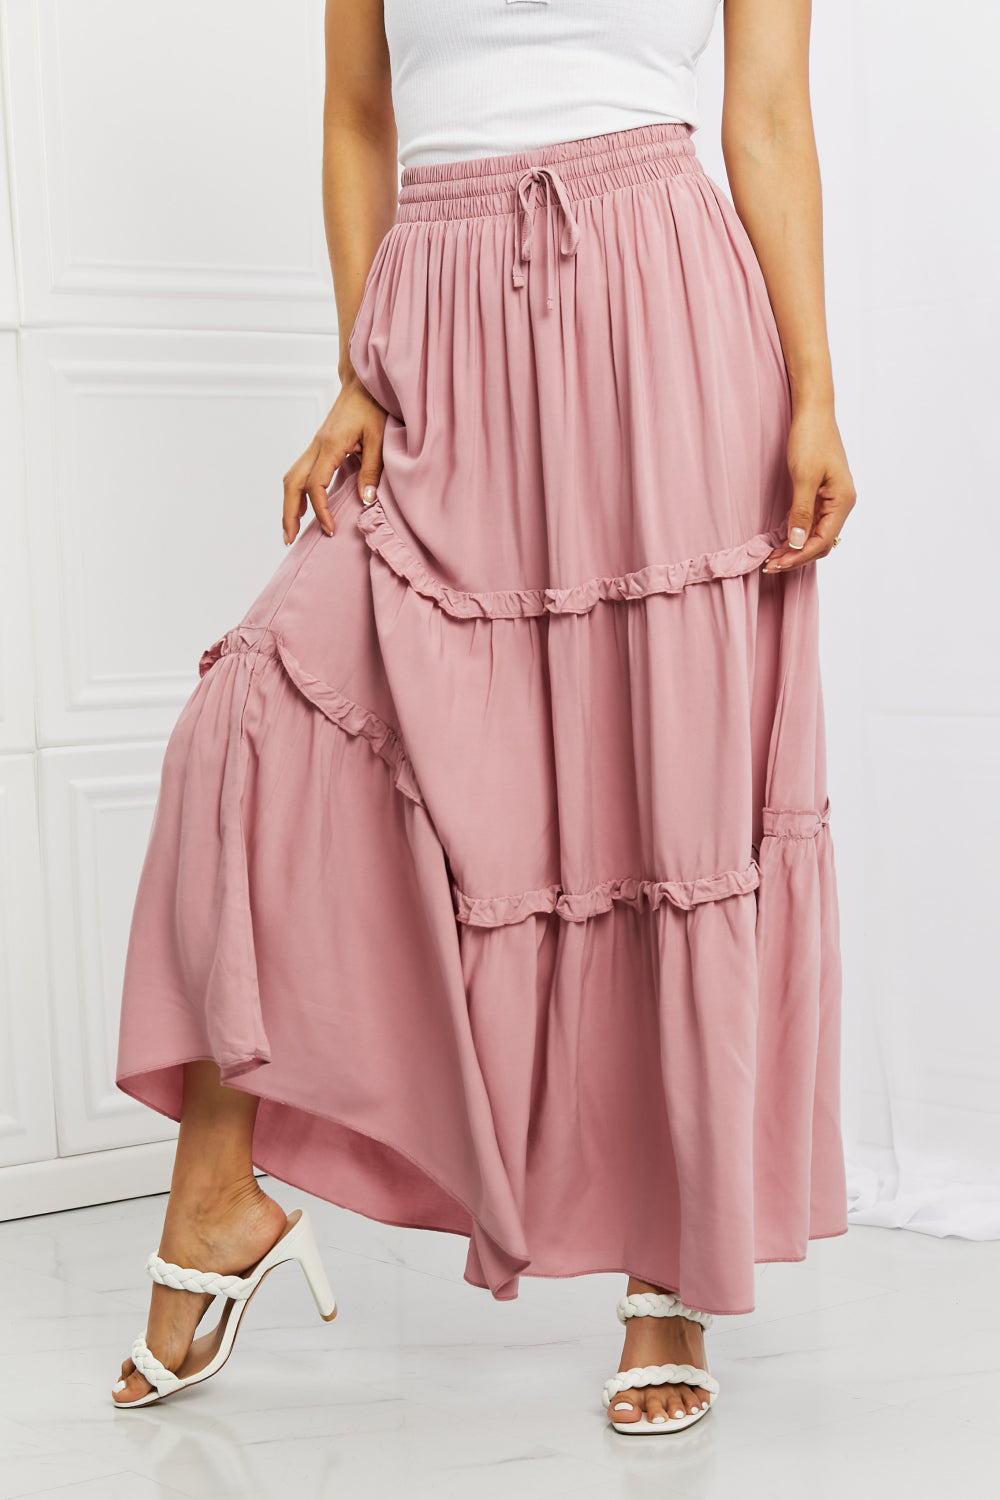 Summer Days Ruffled Maxi Skirt in Mauve  Southern Soul Collectives 